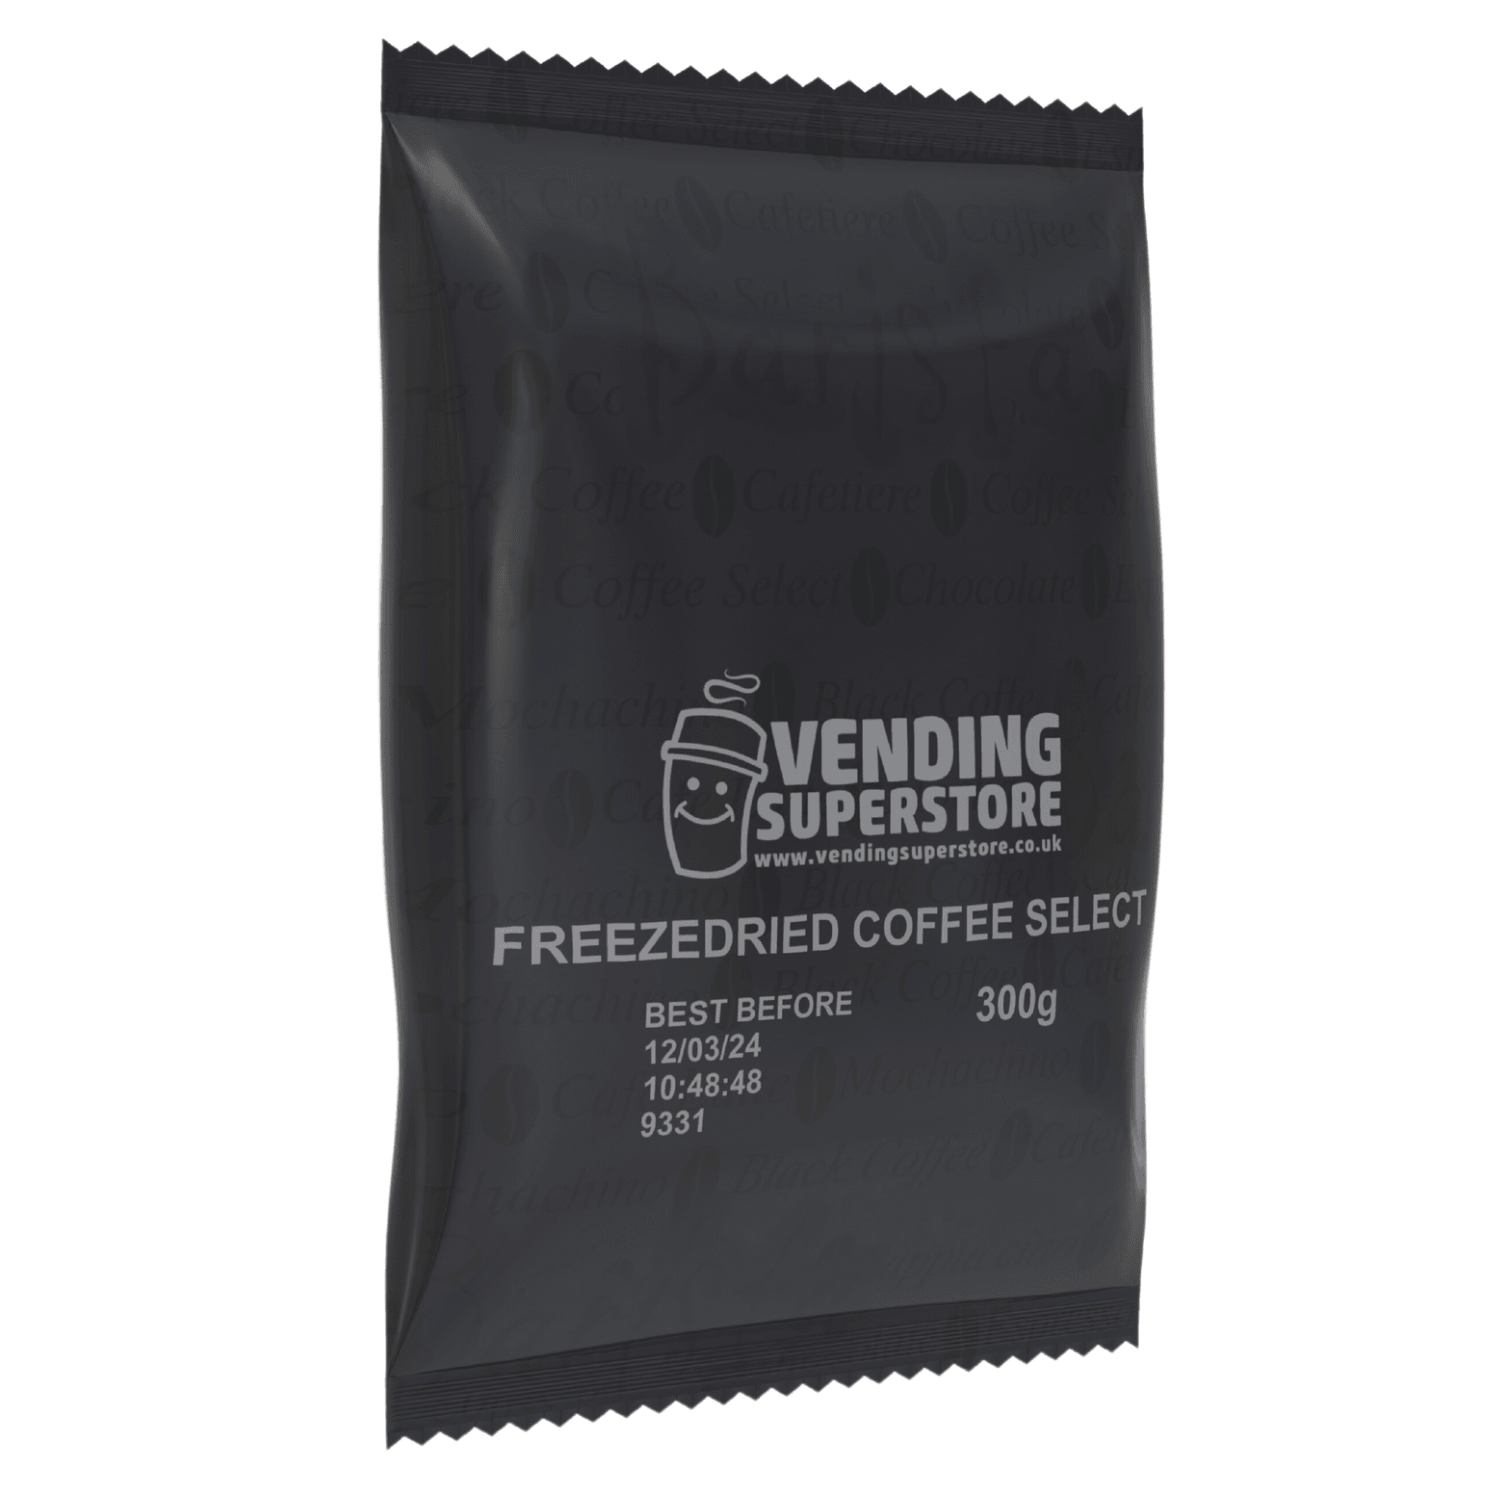 Vending Superstore - Freezedried Coffee Select Vending Coffee - 10 x 300g Bags - Vending Superstore